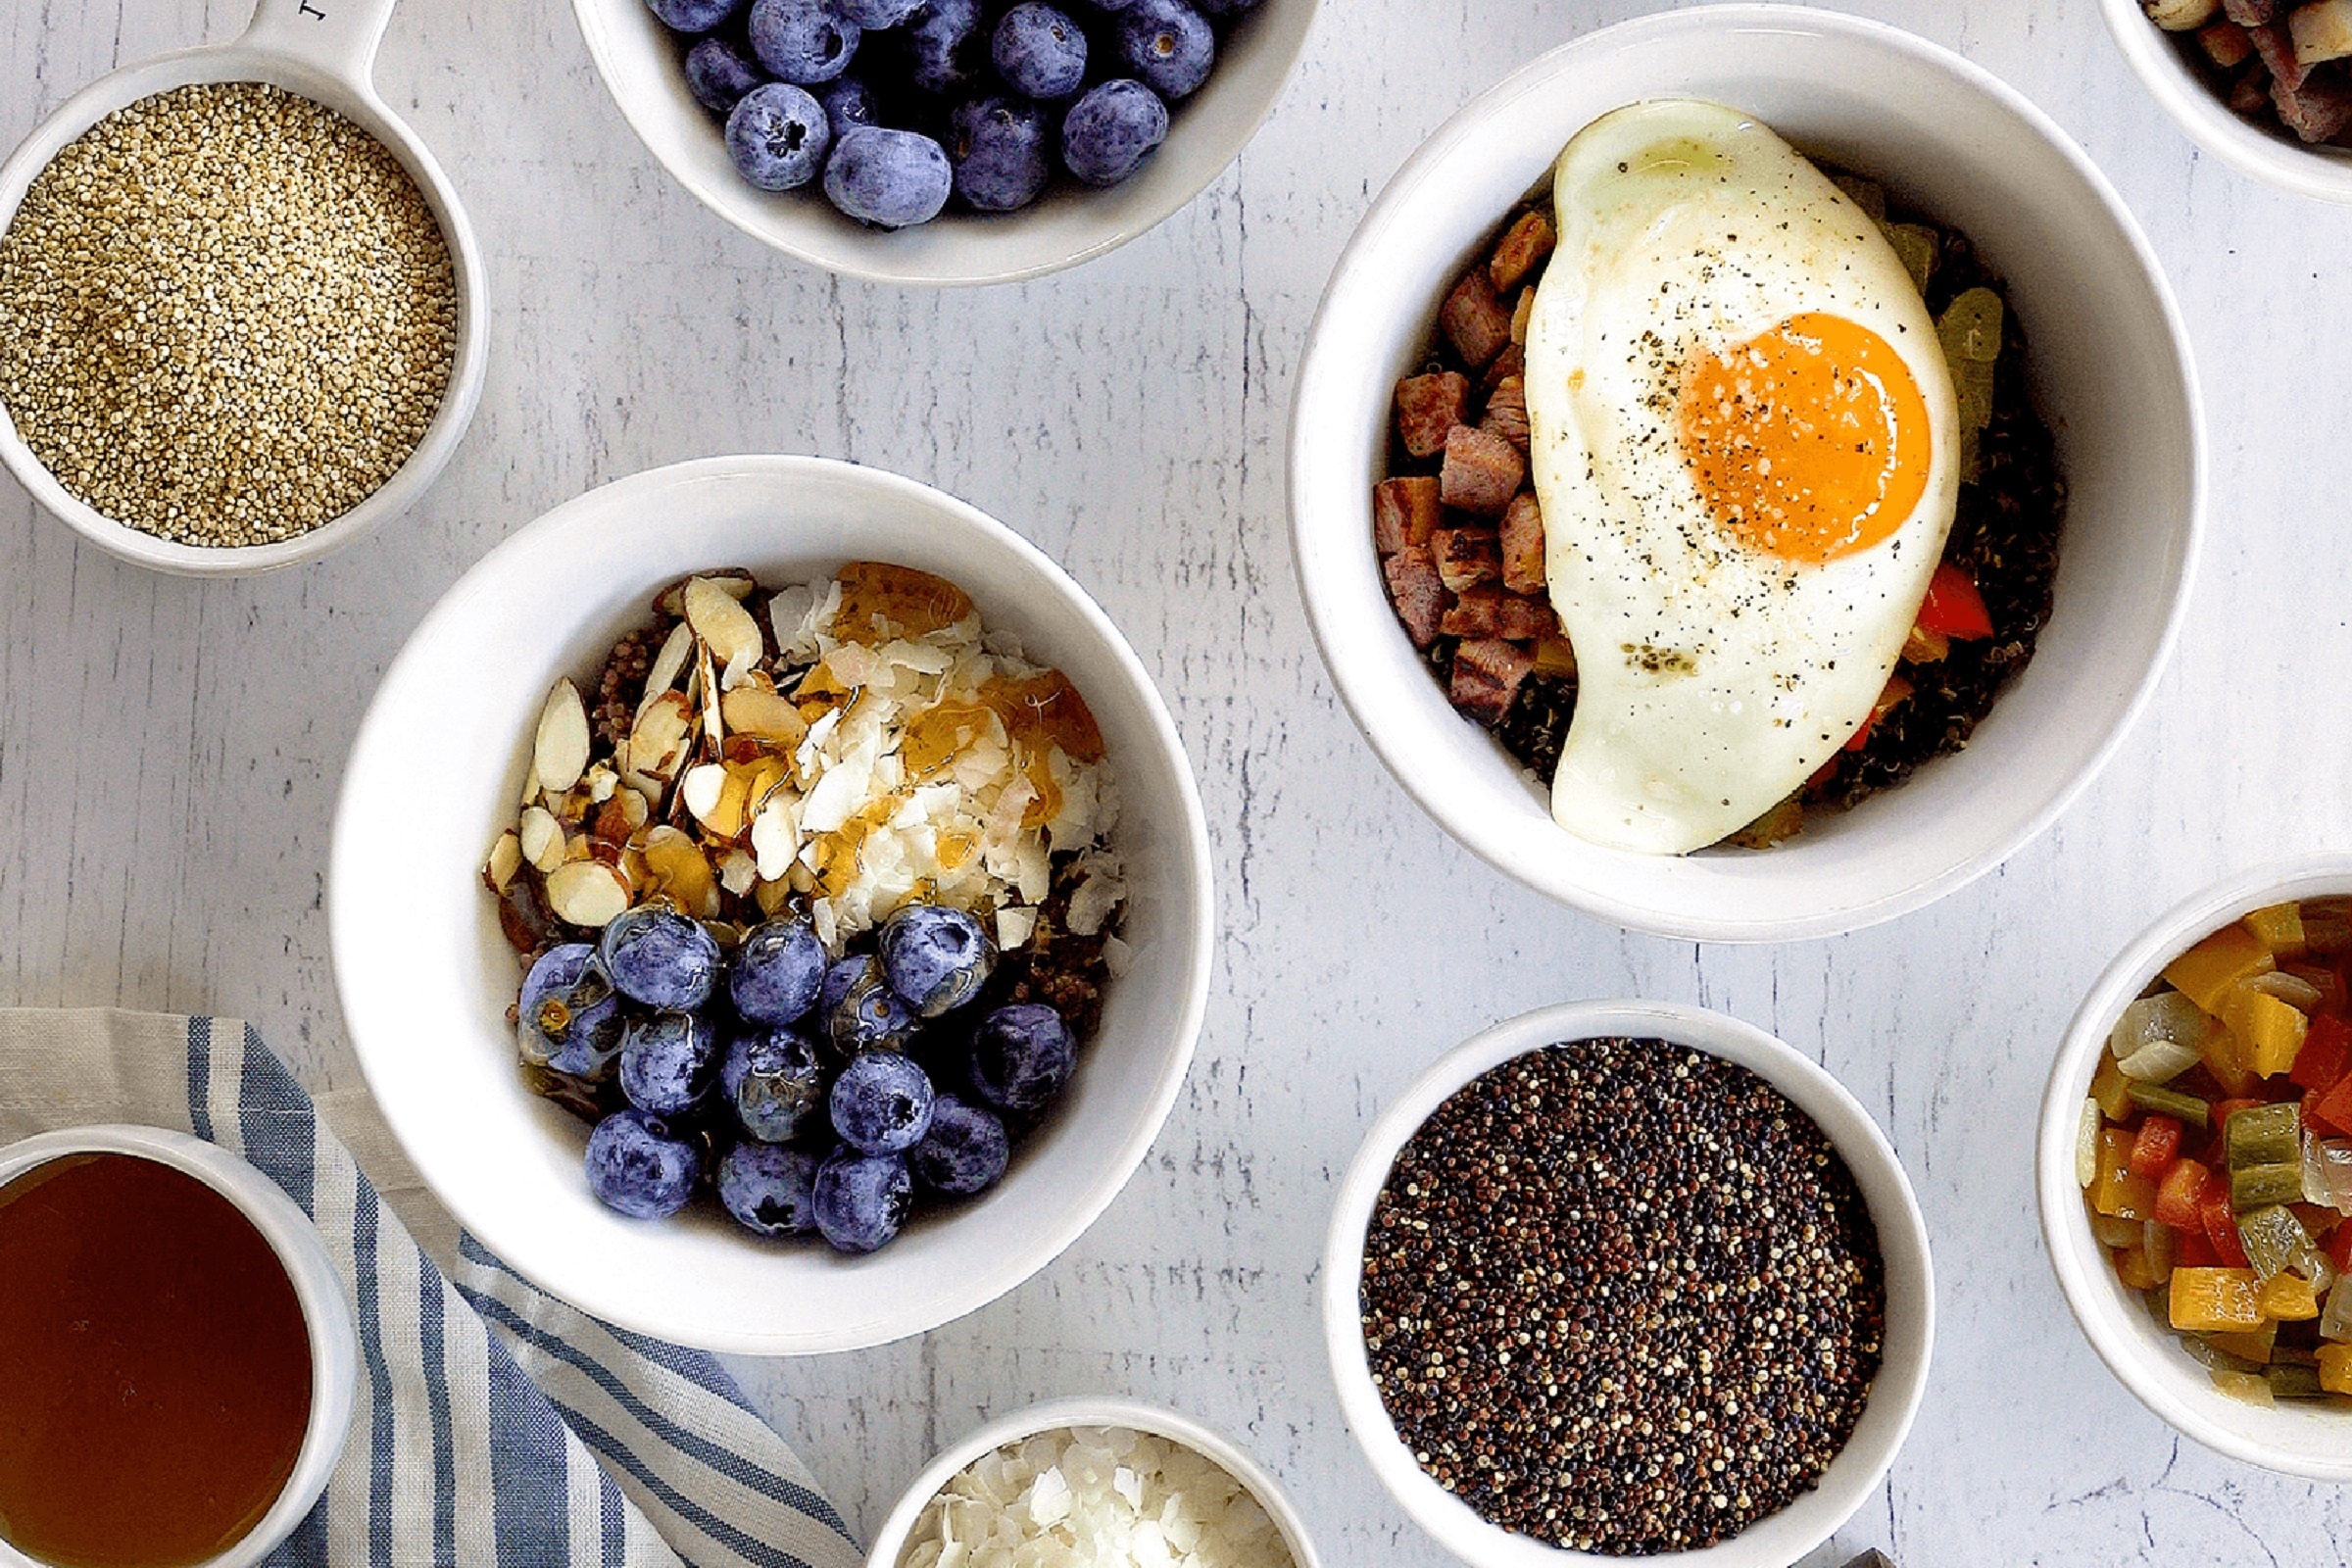 Lundberg Organic Antique White and Tri-Color Blend Quinoa are shown with sweet and savory breakfast bowls.